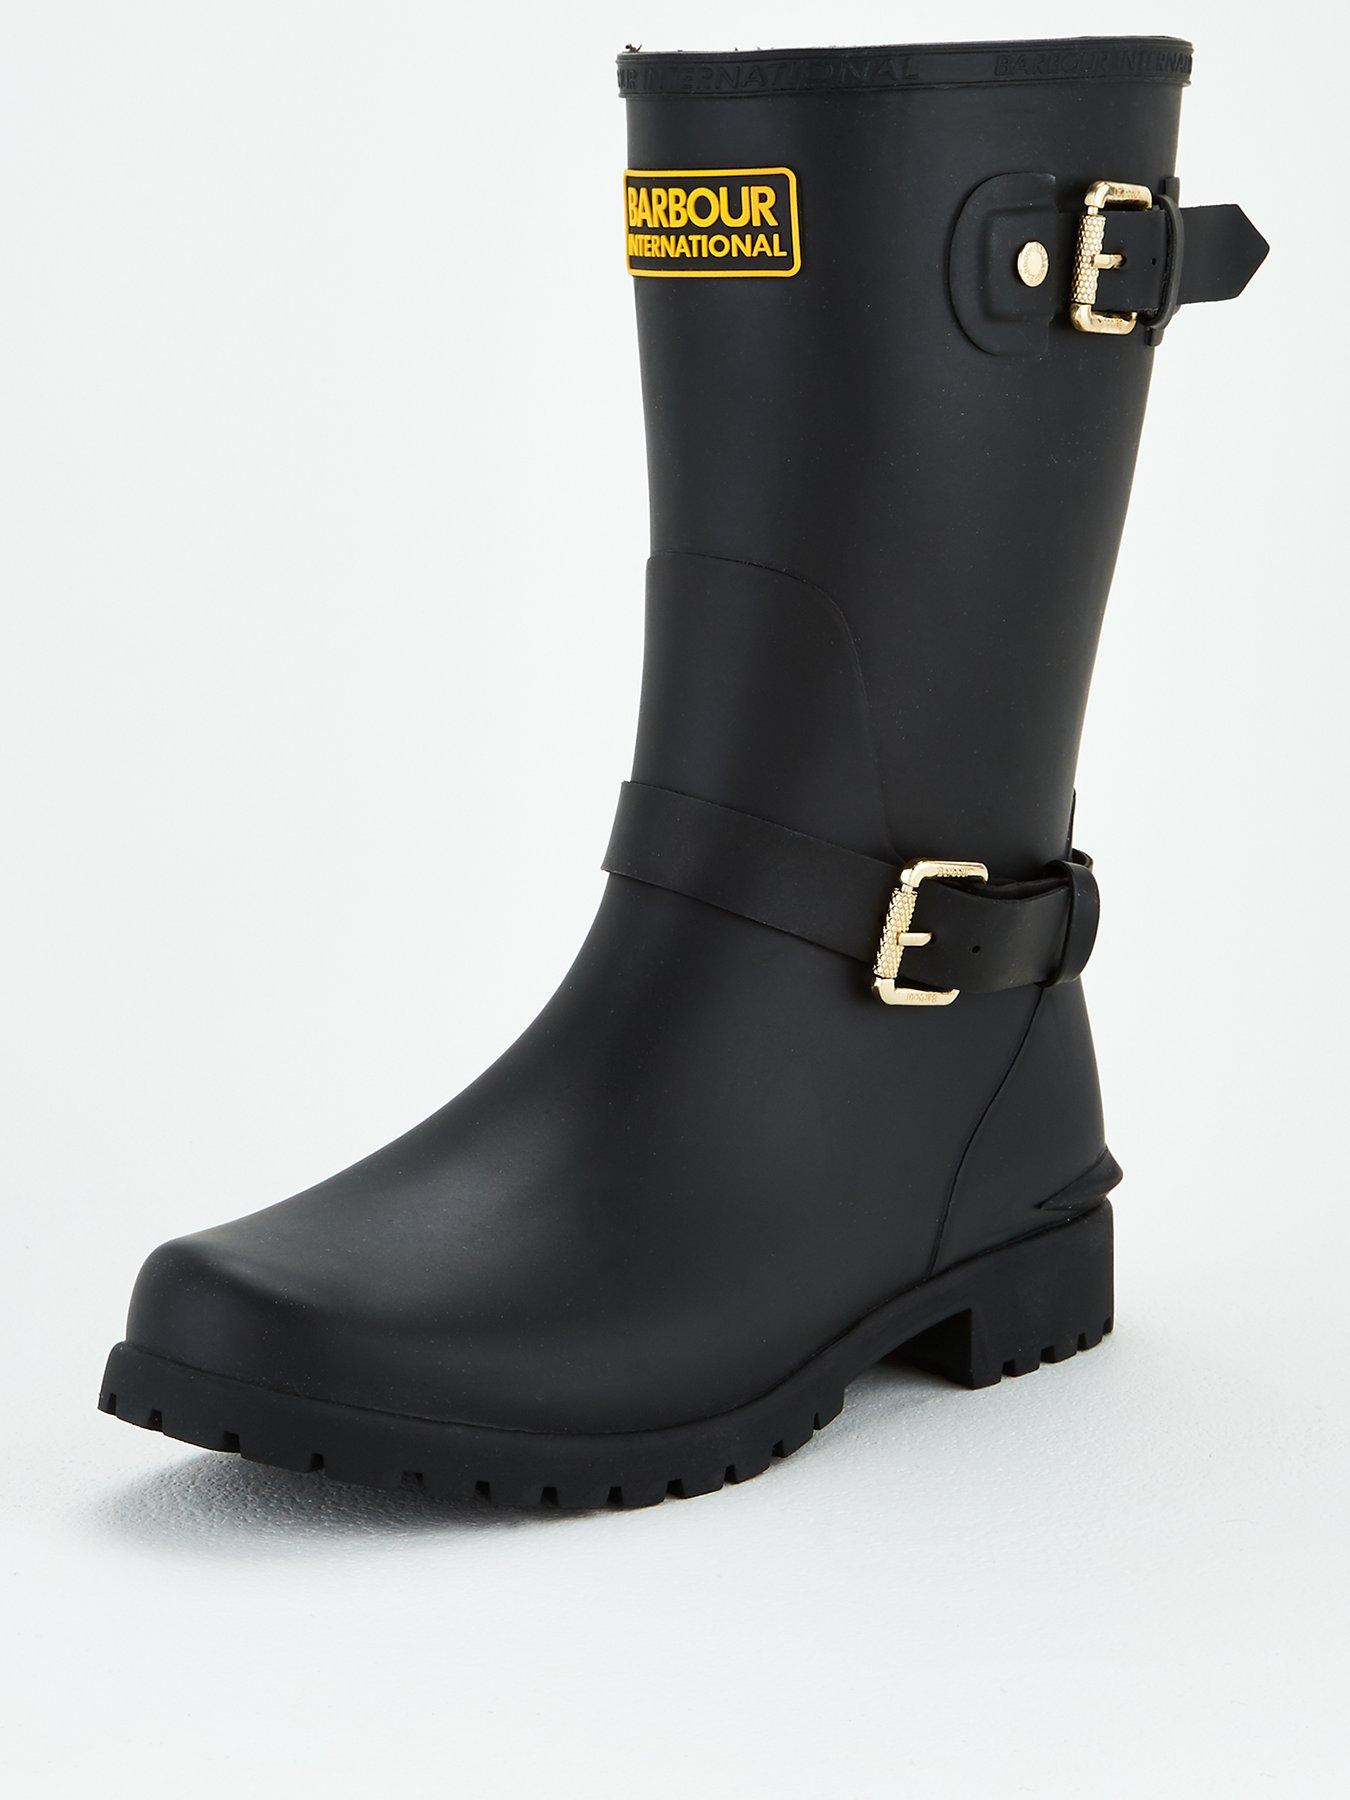 barbour international boots